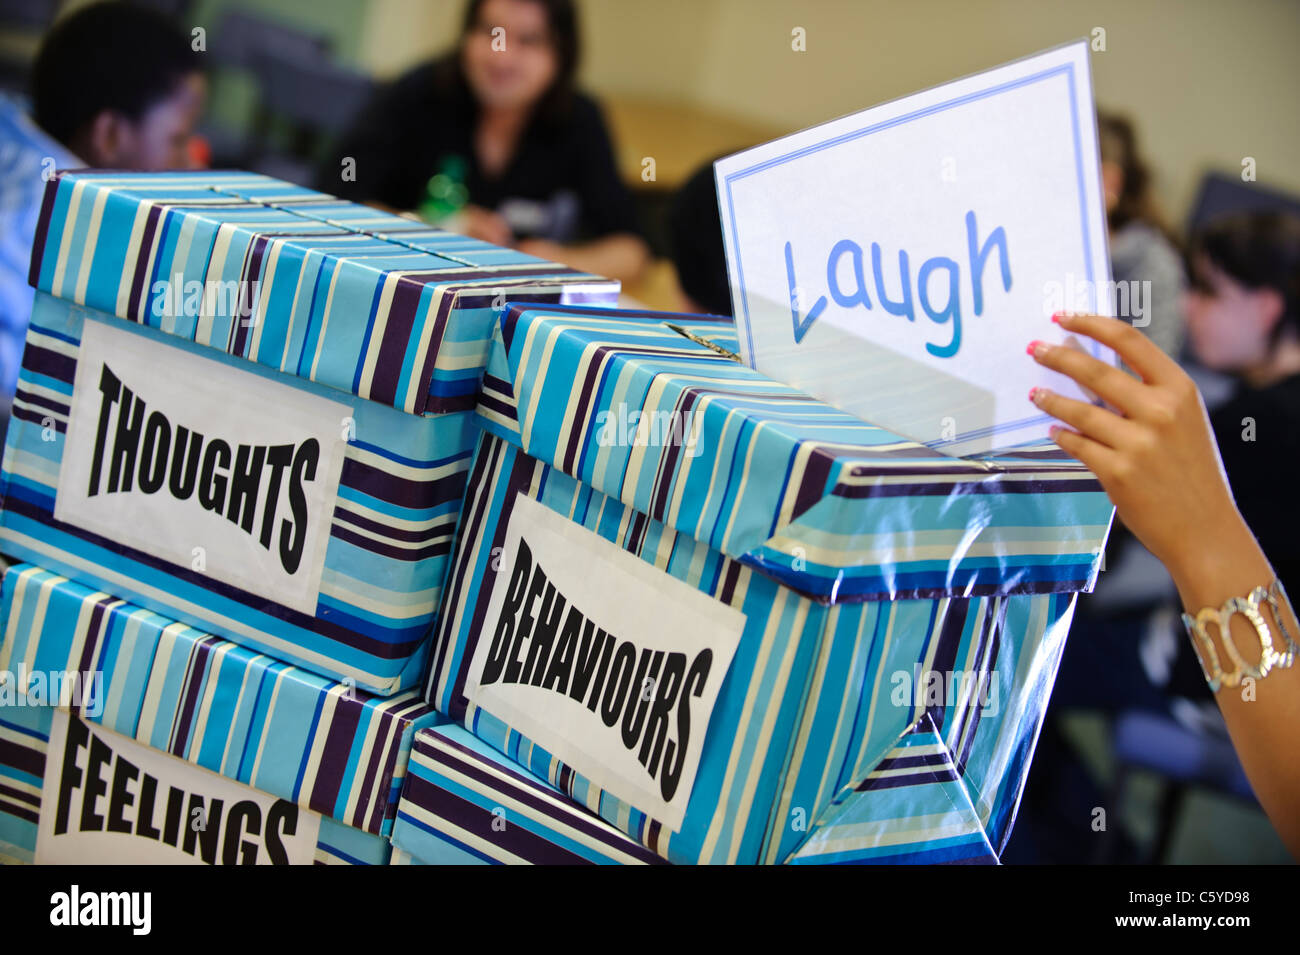 card saying laugh being put into boxes labeled thoughts behaviors feelings in a classroom Stock Photo